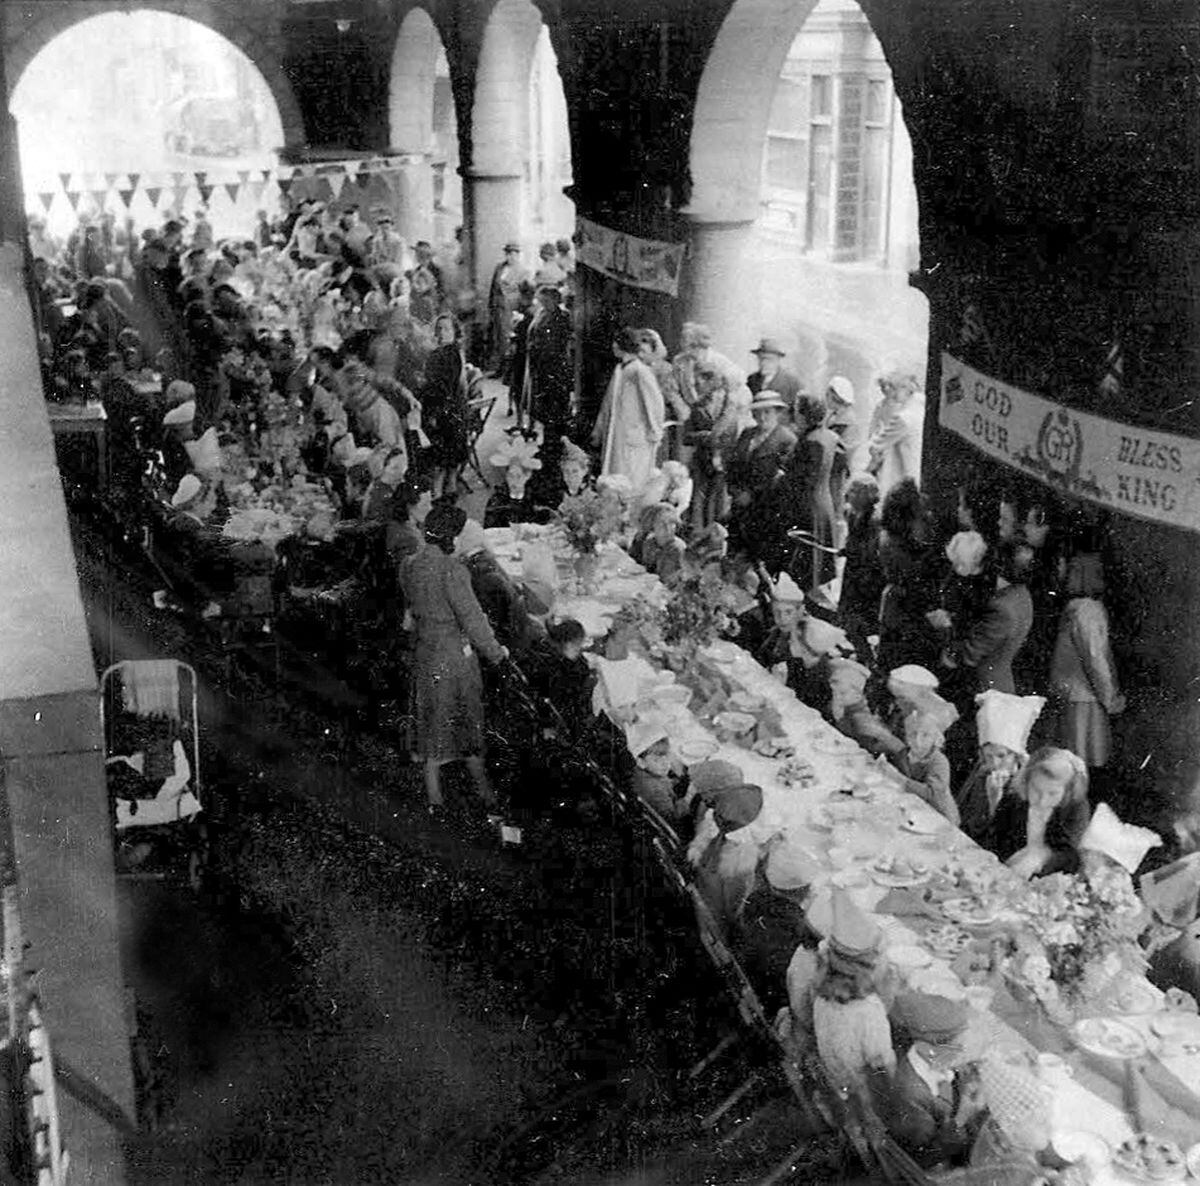 This victory street party for 300 Bridgnorth children was held under Bridgnorth Town Hall on Thursday, August 23, 1945.